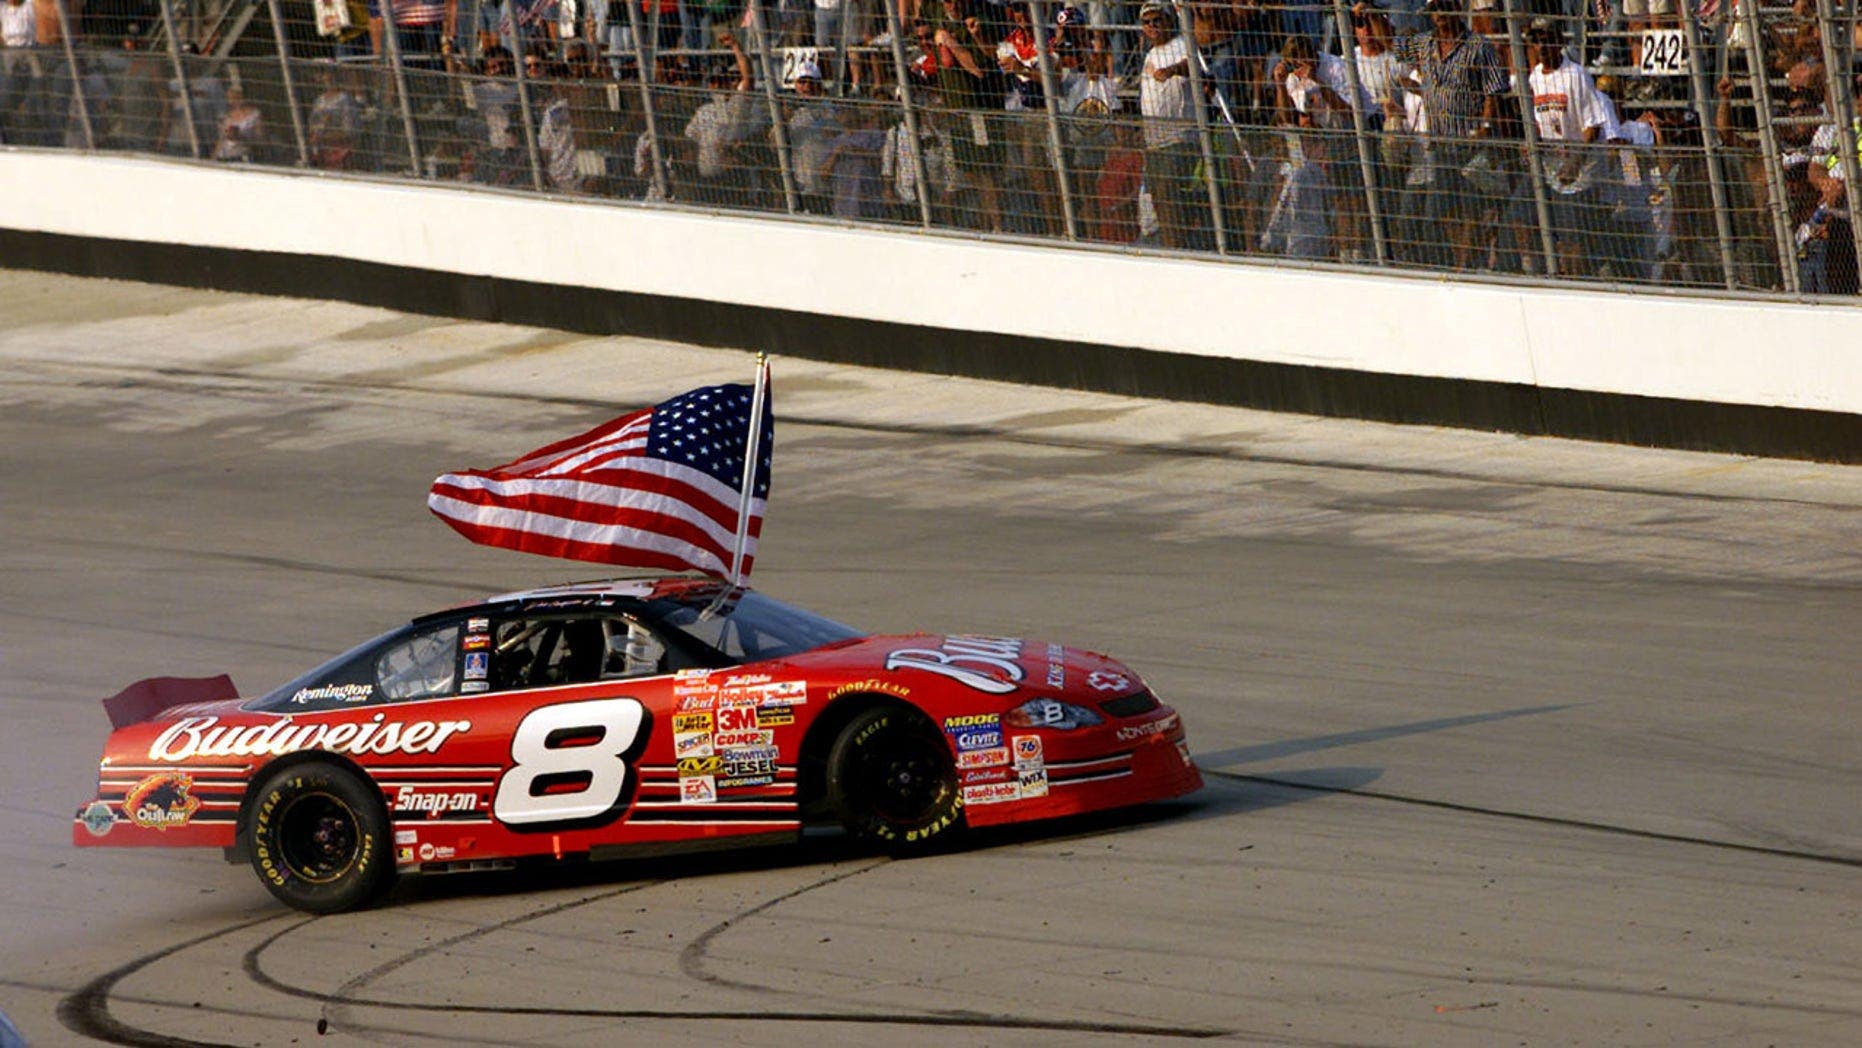 NASCAR to honor the victims and heroes of 9/11 at Richmond playoff race